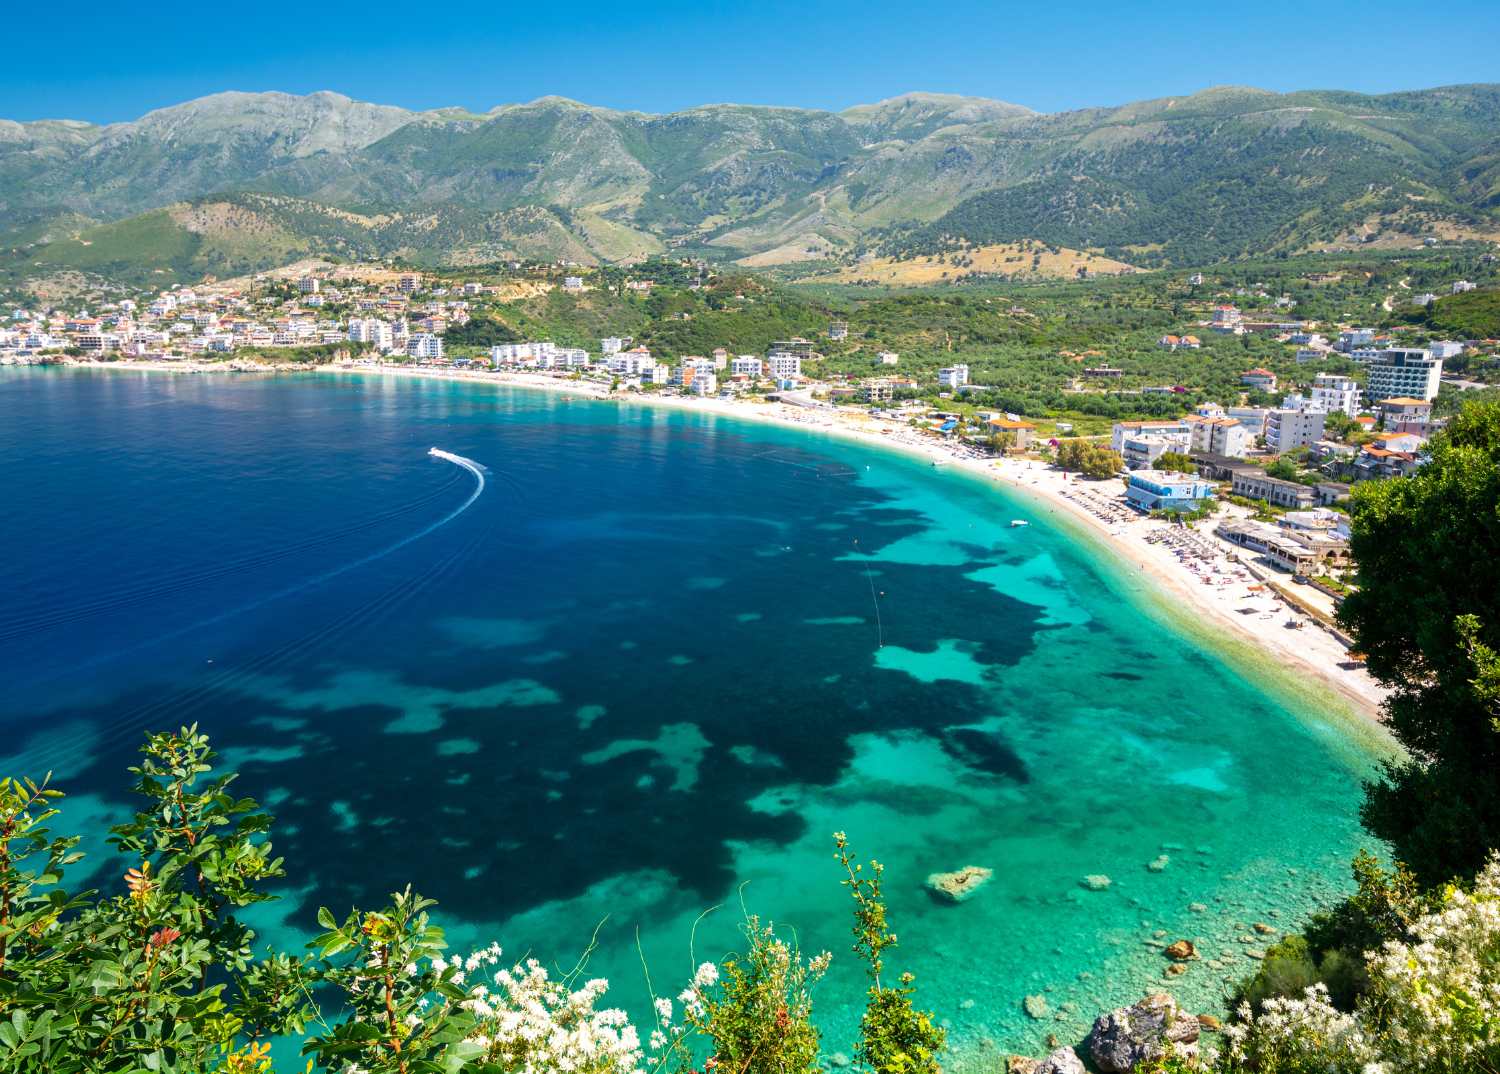 Himare in Albania is a budget friendly destination in Europe with stunning beaches